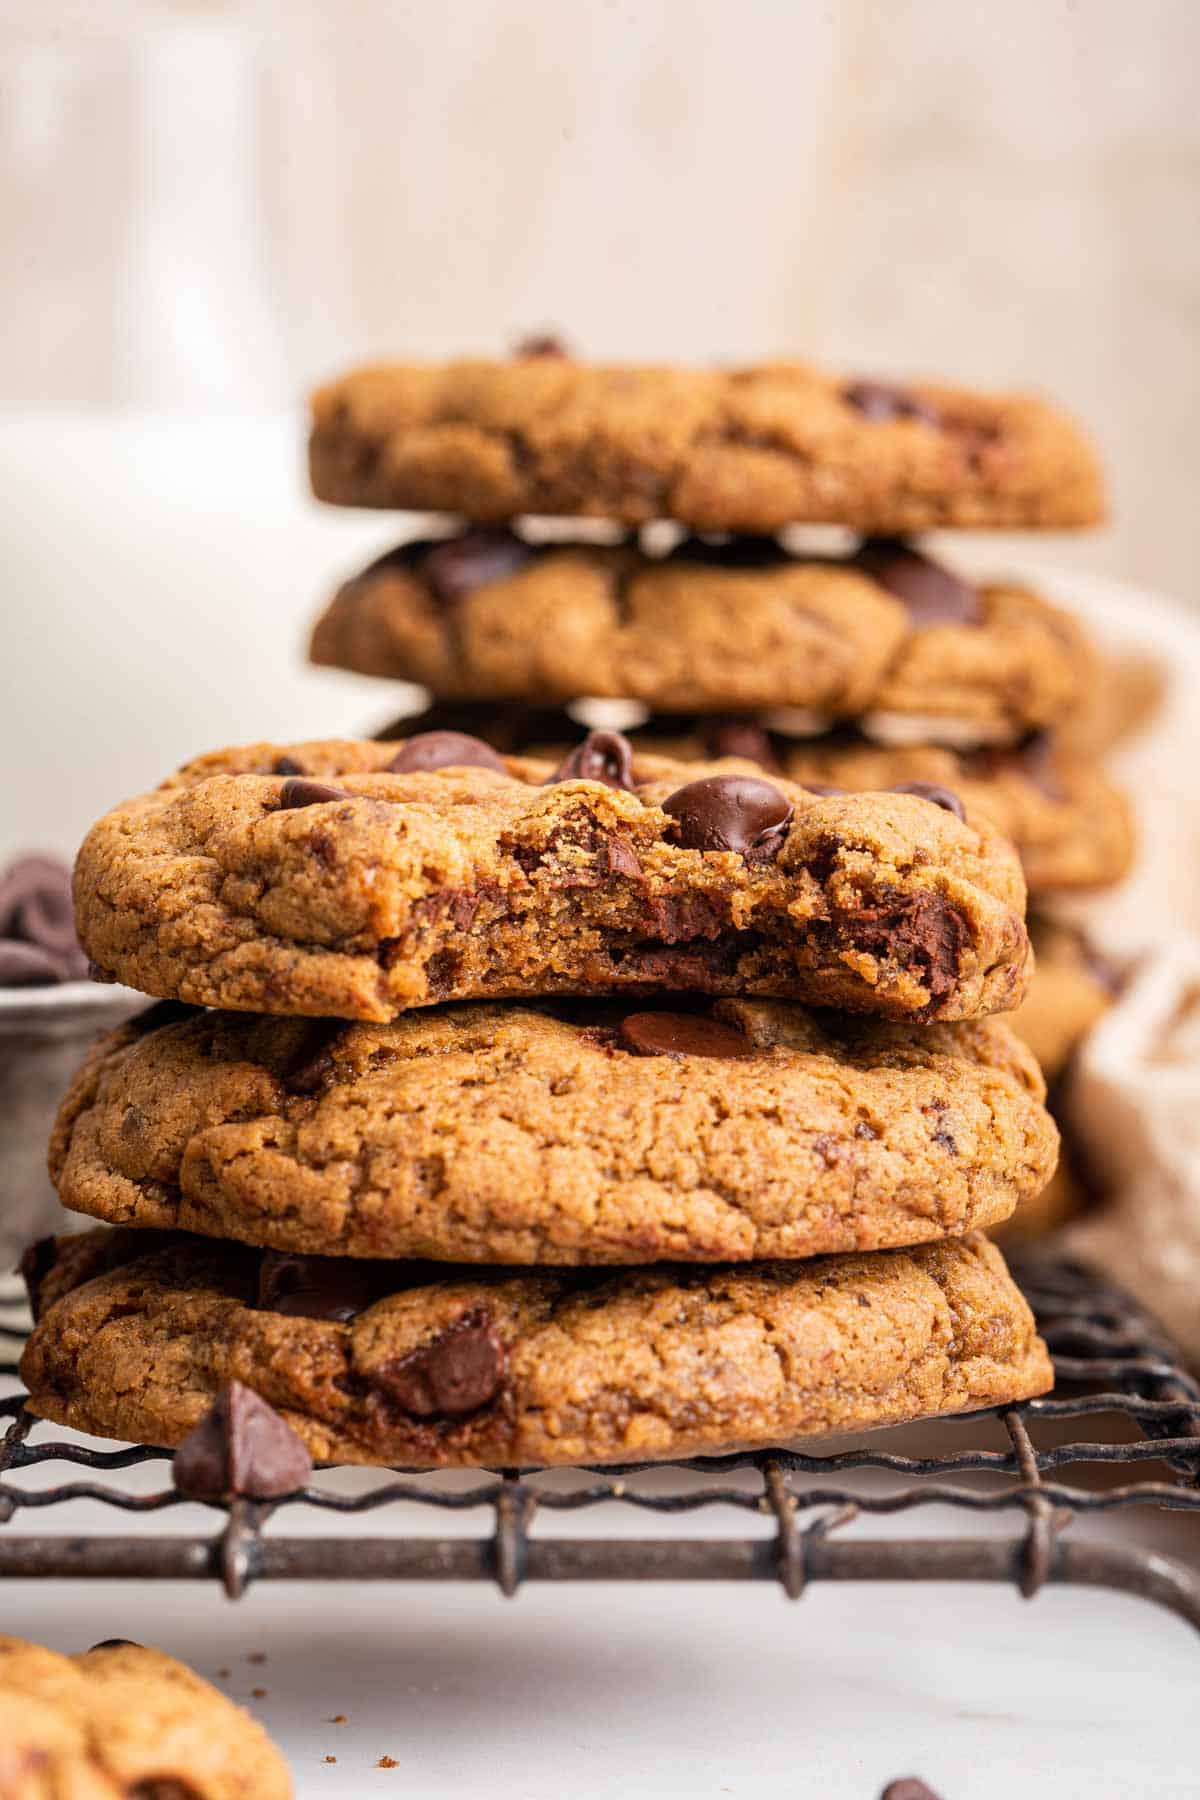 Stack of brown almond butter chocolate chip cookies with a bite missing from the top cookie.